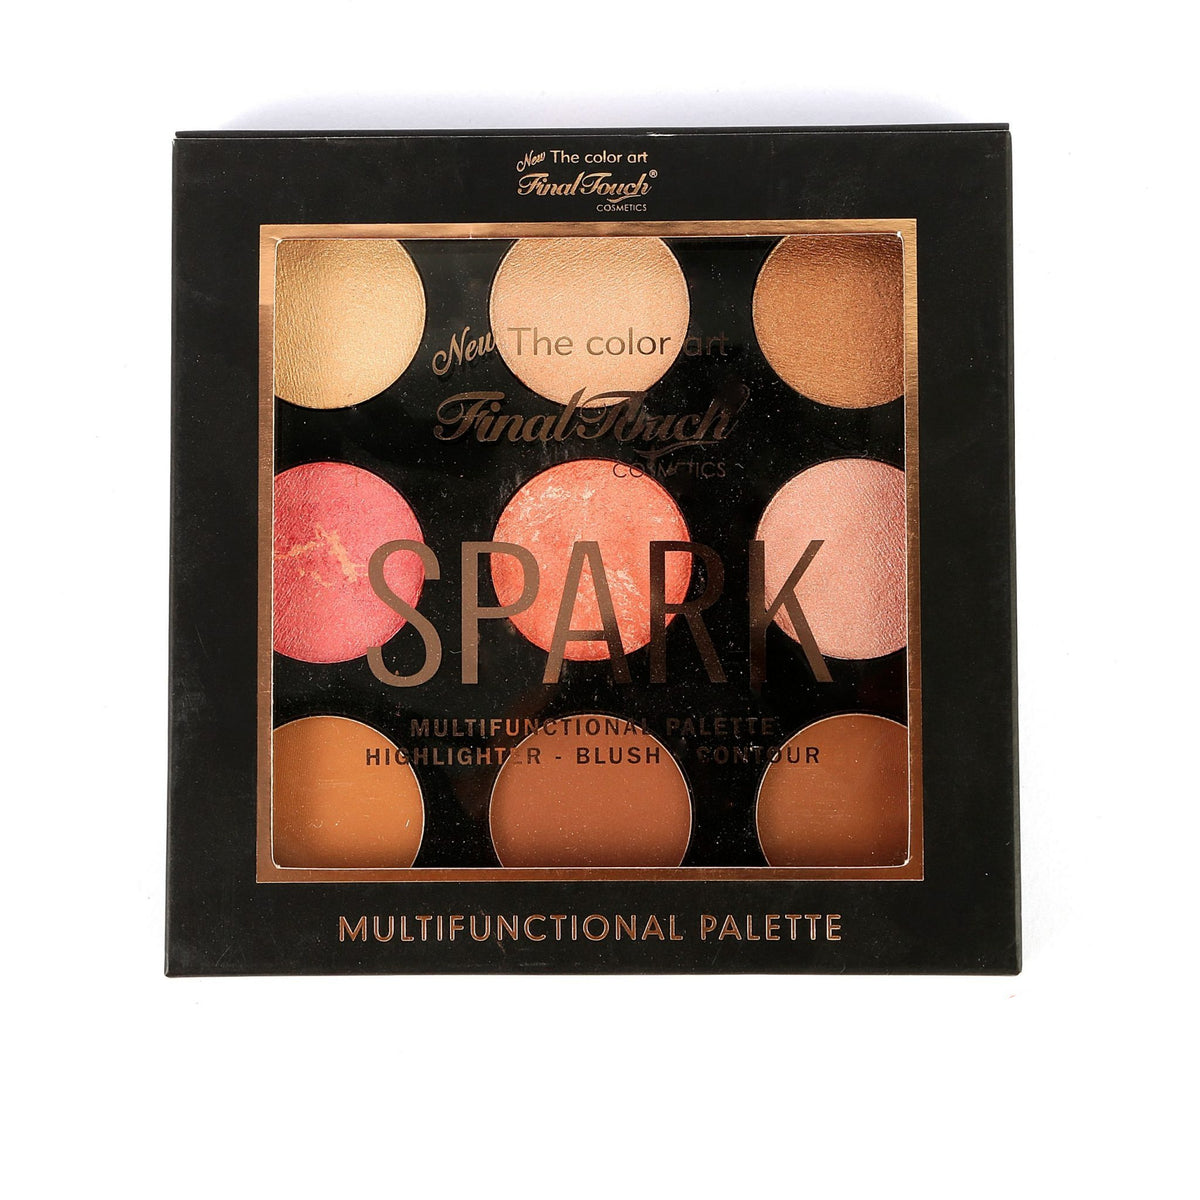 Final Touch Spark Multifunctional Palette Highlighter - Blush - Contour 22.5g 02 freeshipping - lasertag.pk